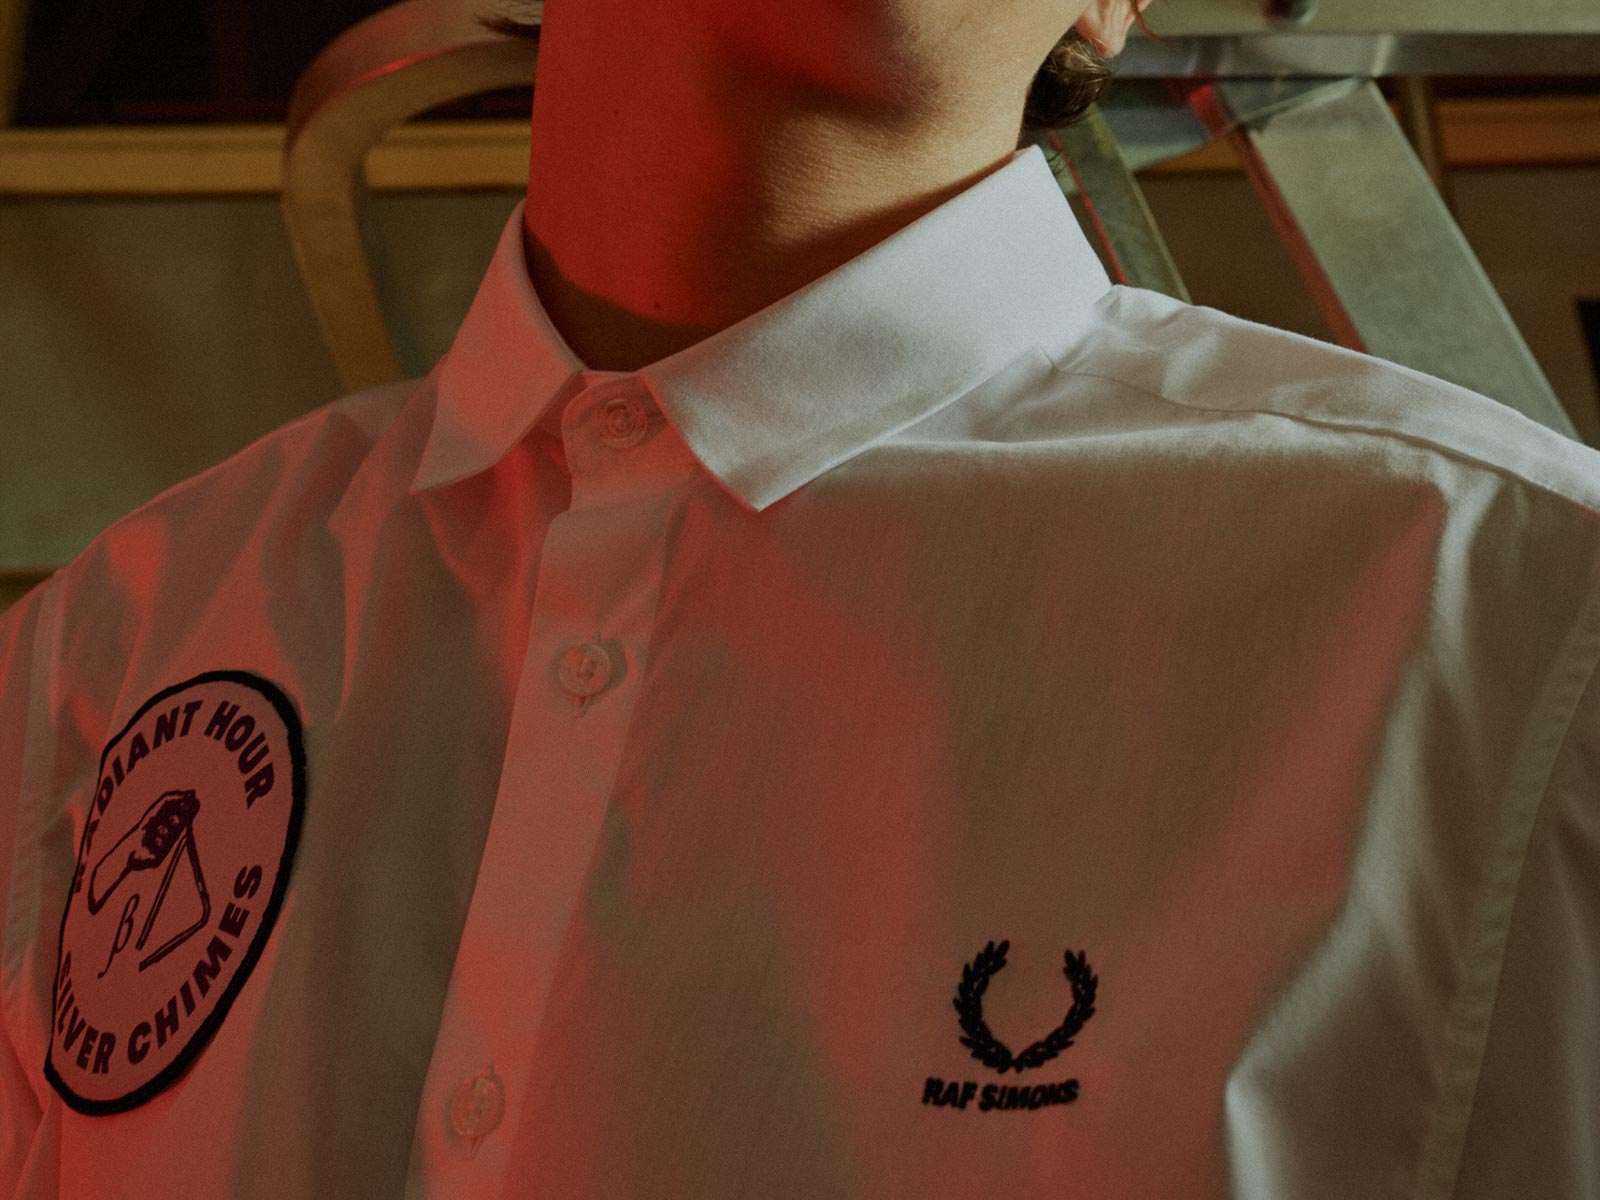 Fred Perry and Raf Simons celebrate the freedom and energy of youth